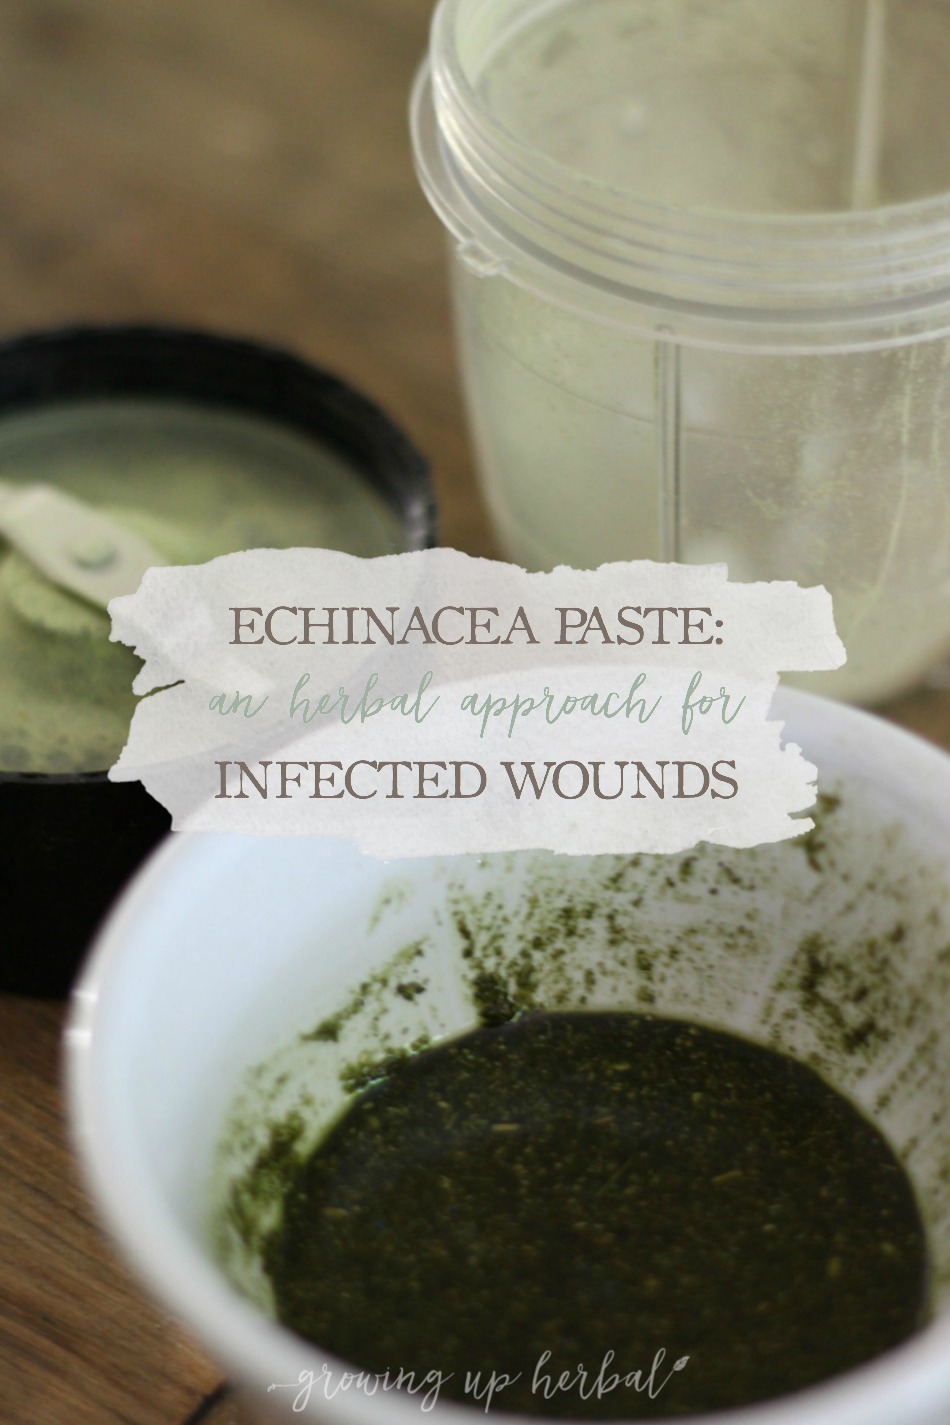 Echinacea Paste: An Herbal Approach For Infected Wounds | Growing Up Herbal | Echinacea is a well-known herbal ally for venomous animal and insect bites and stings as well as infected wounds. Learn how to use it effectively for infections in this blog post!